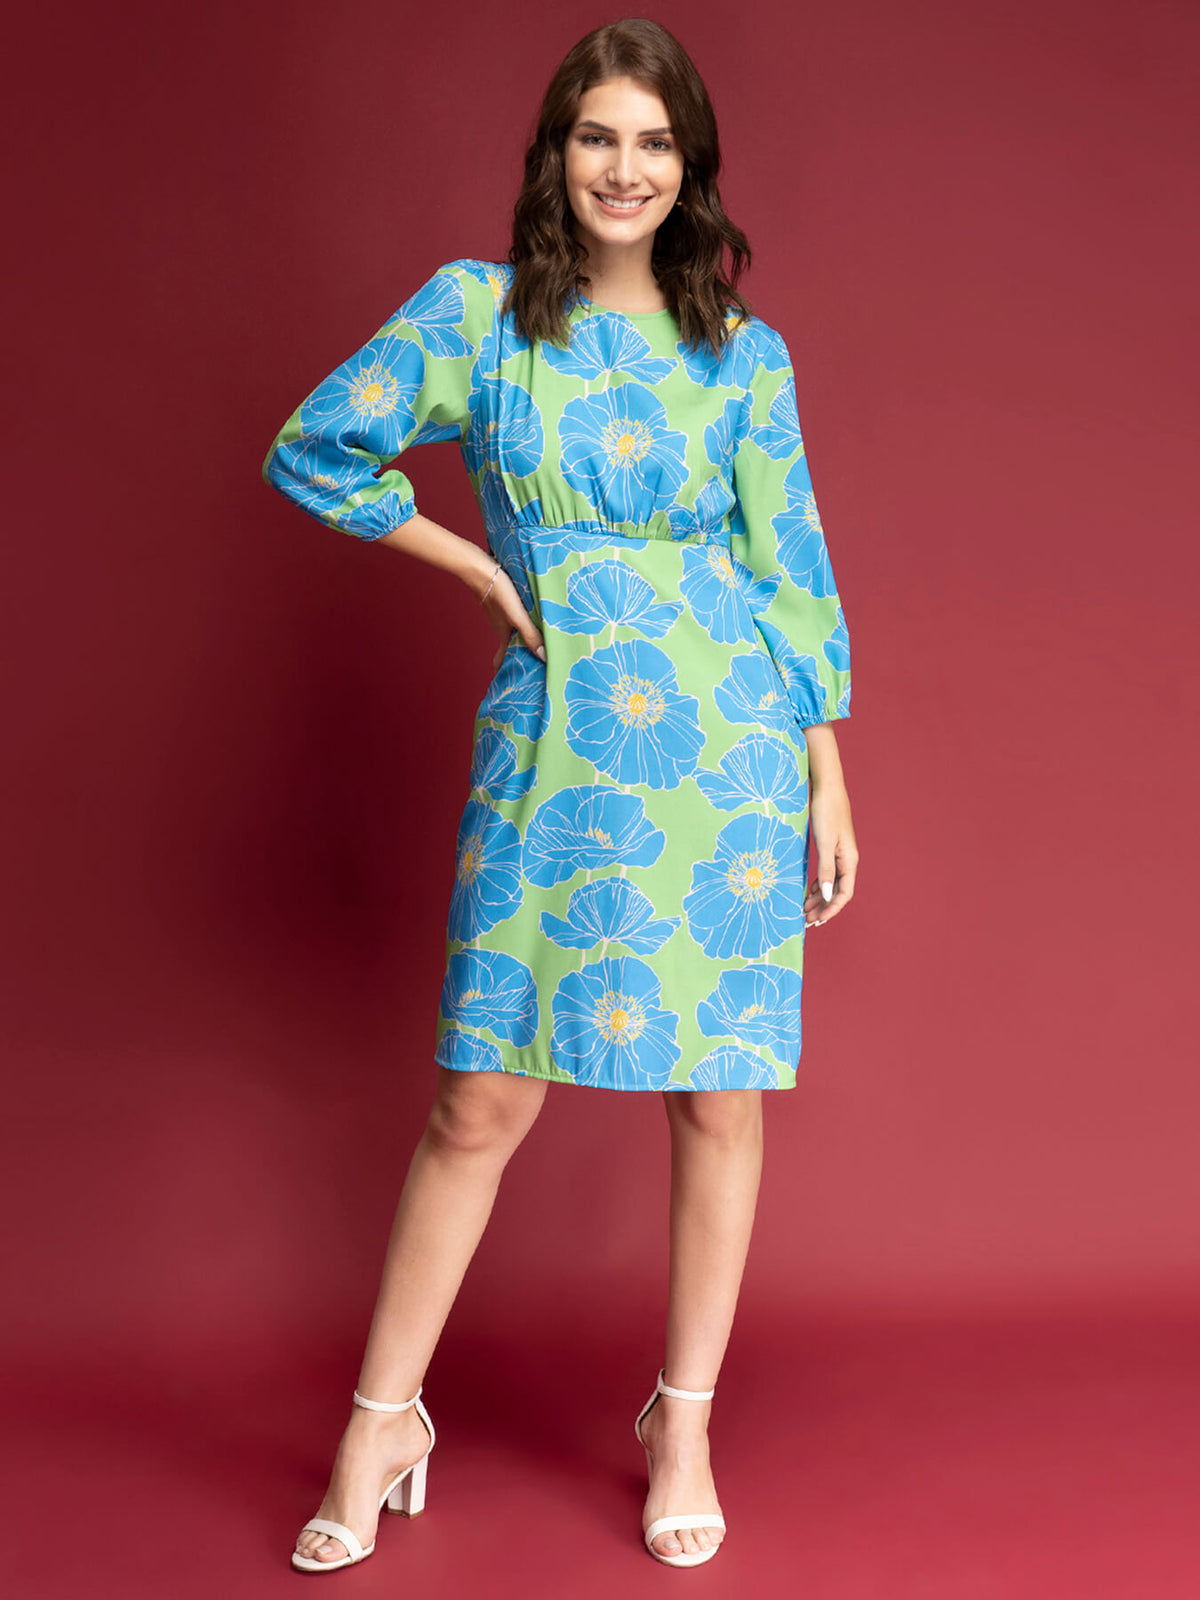 Floral Print Empire Line Dress - Blue And Green